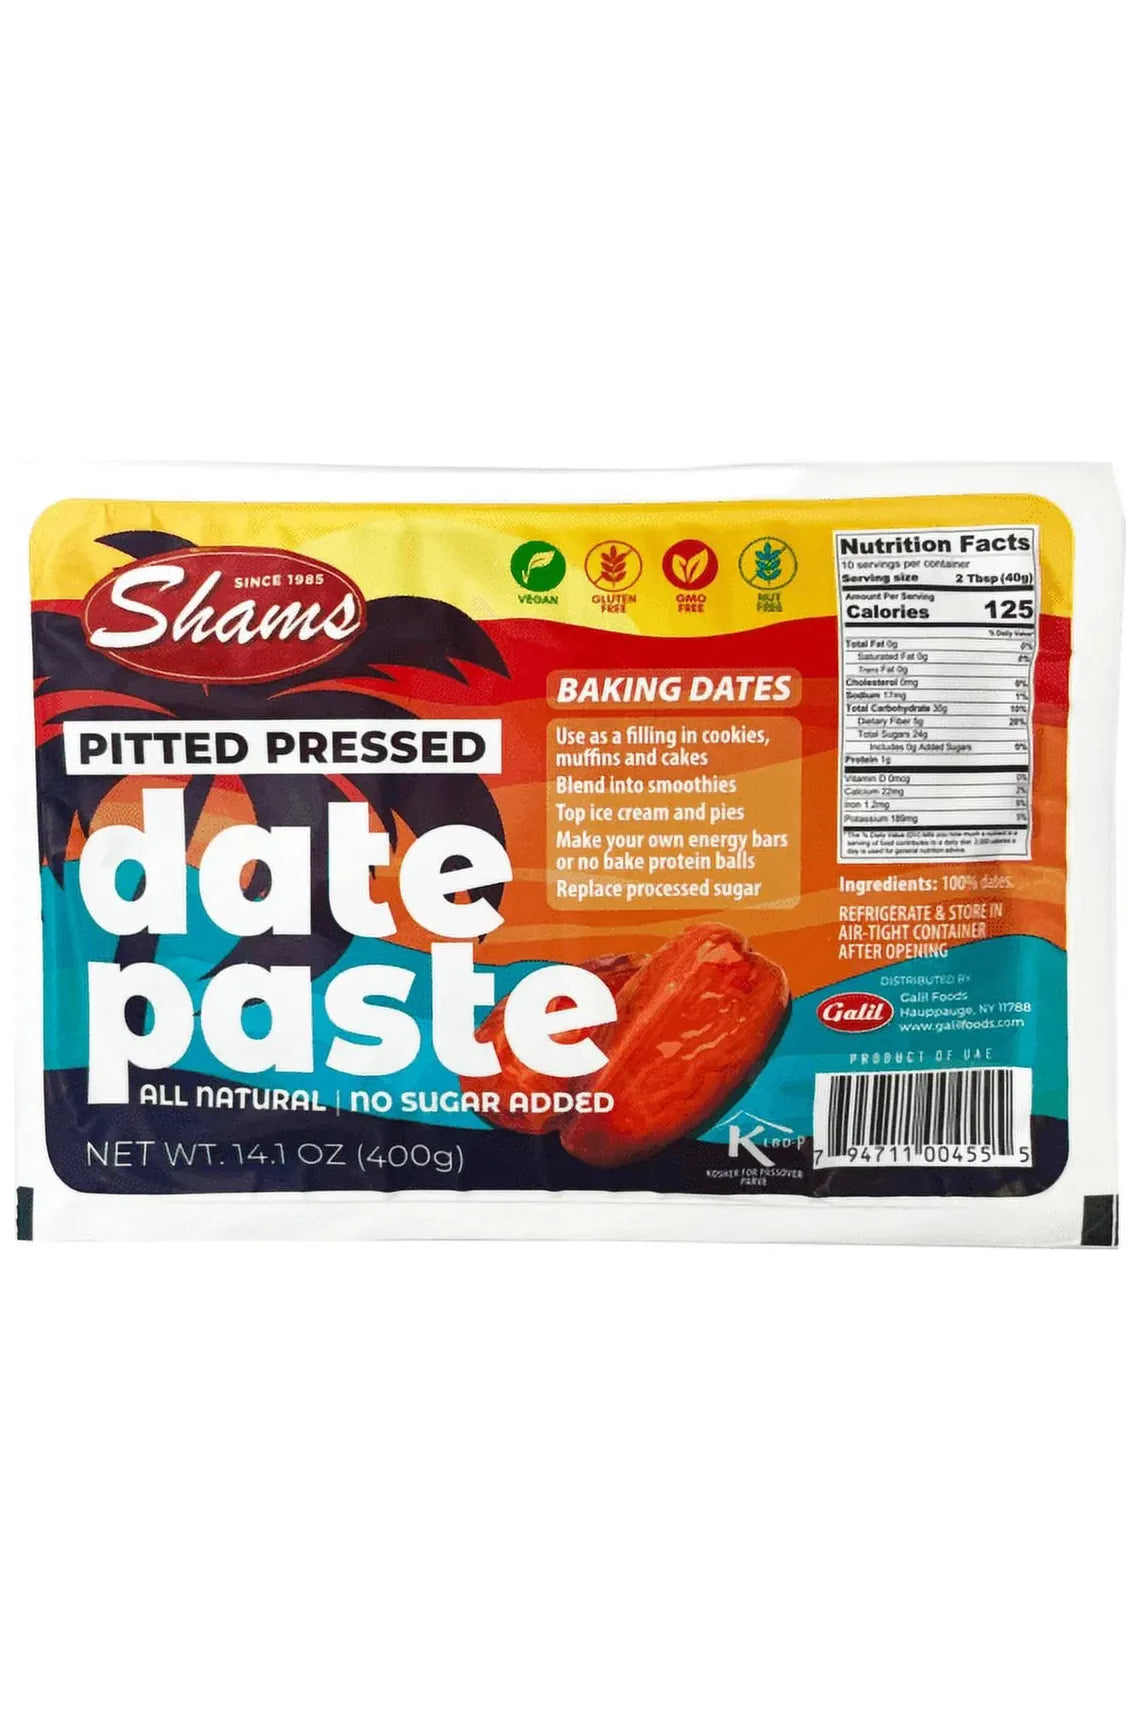 Shams - Pitted Pressed DATE PASTE - 400g